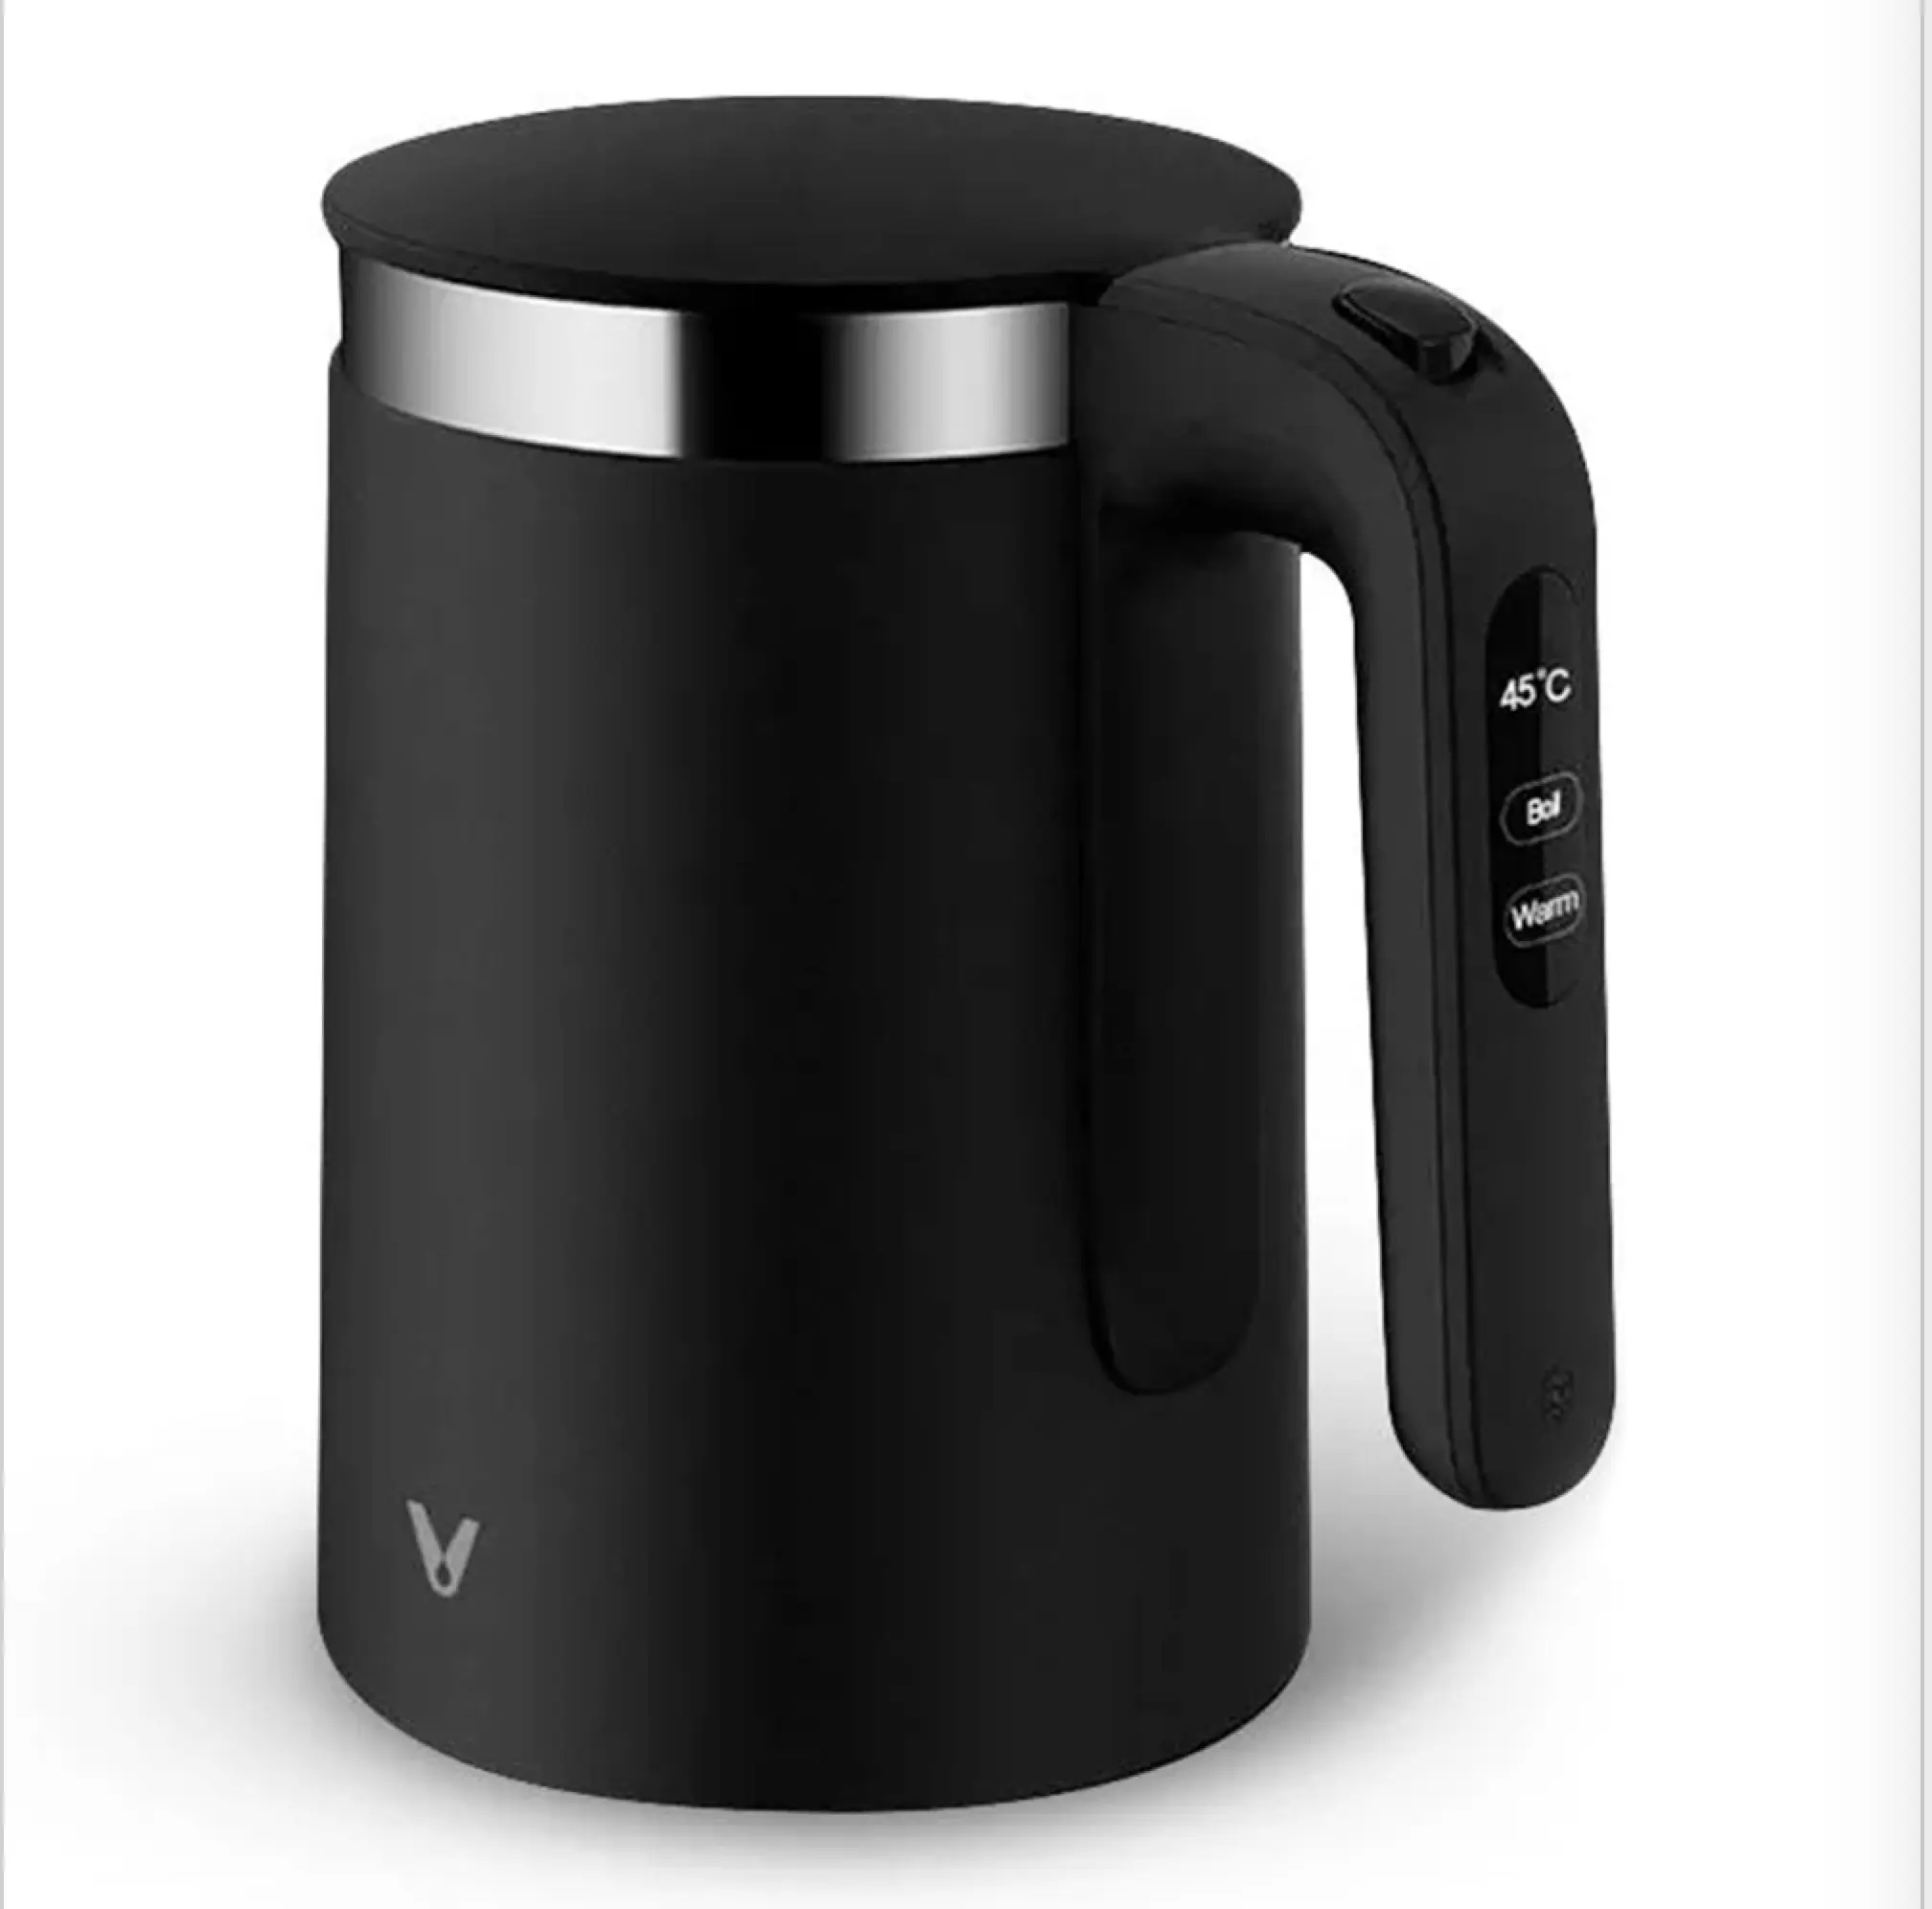 Xiaomi VIOMI V-SK152B Stainless Steel Electric Kettle